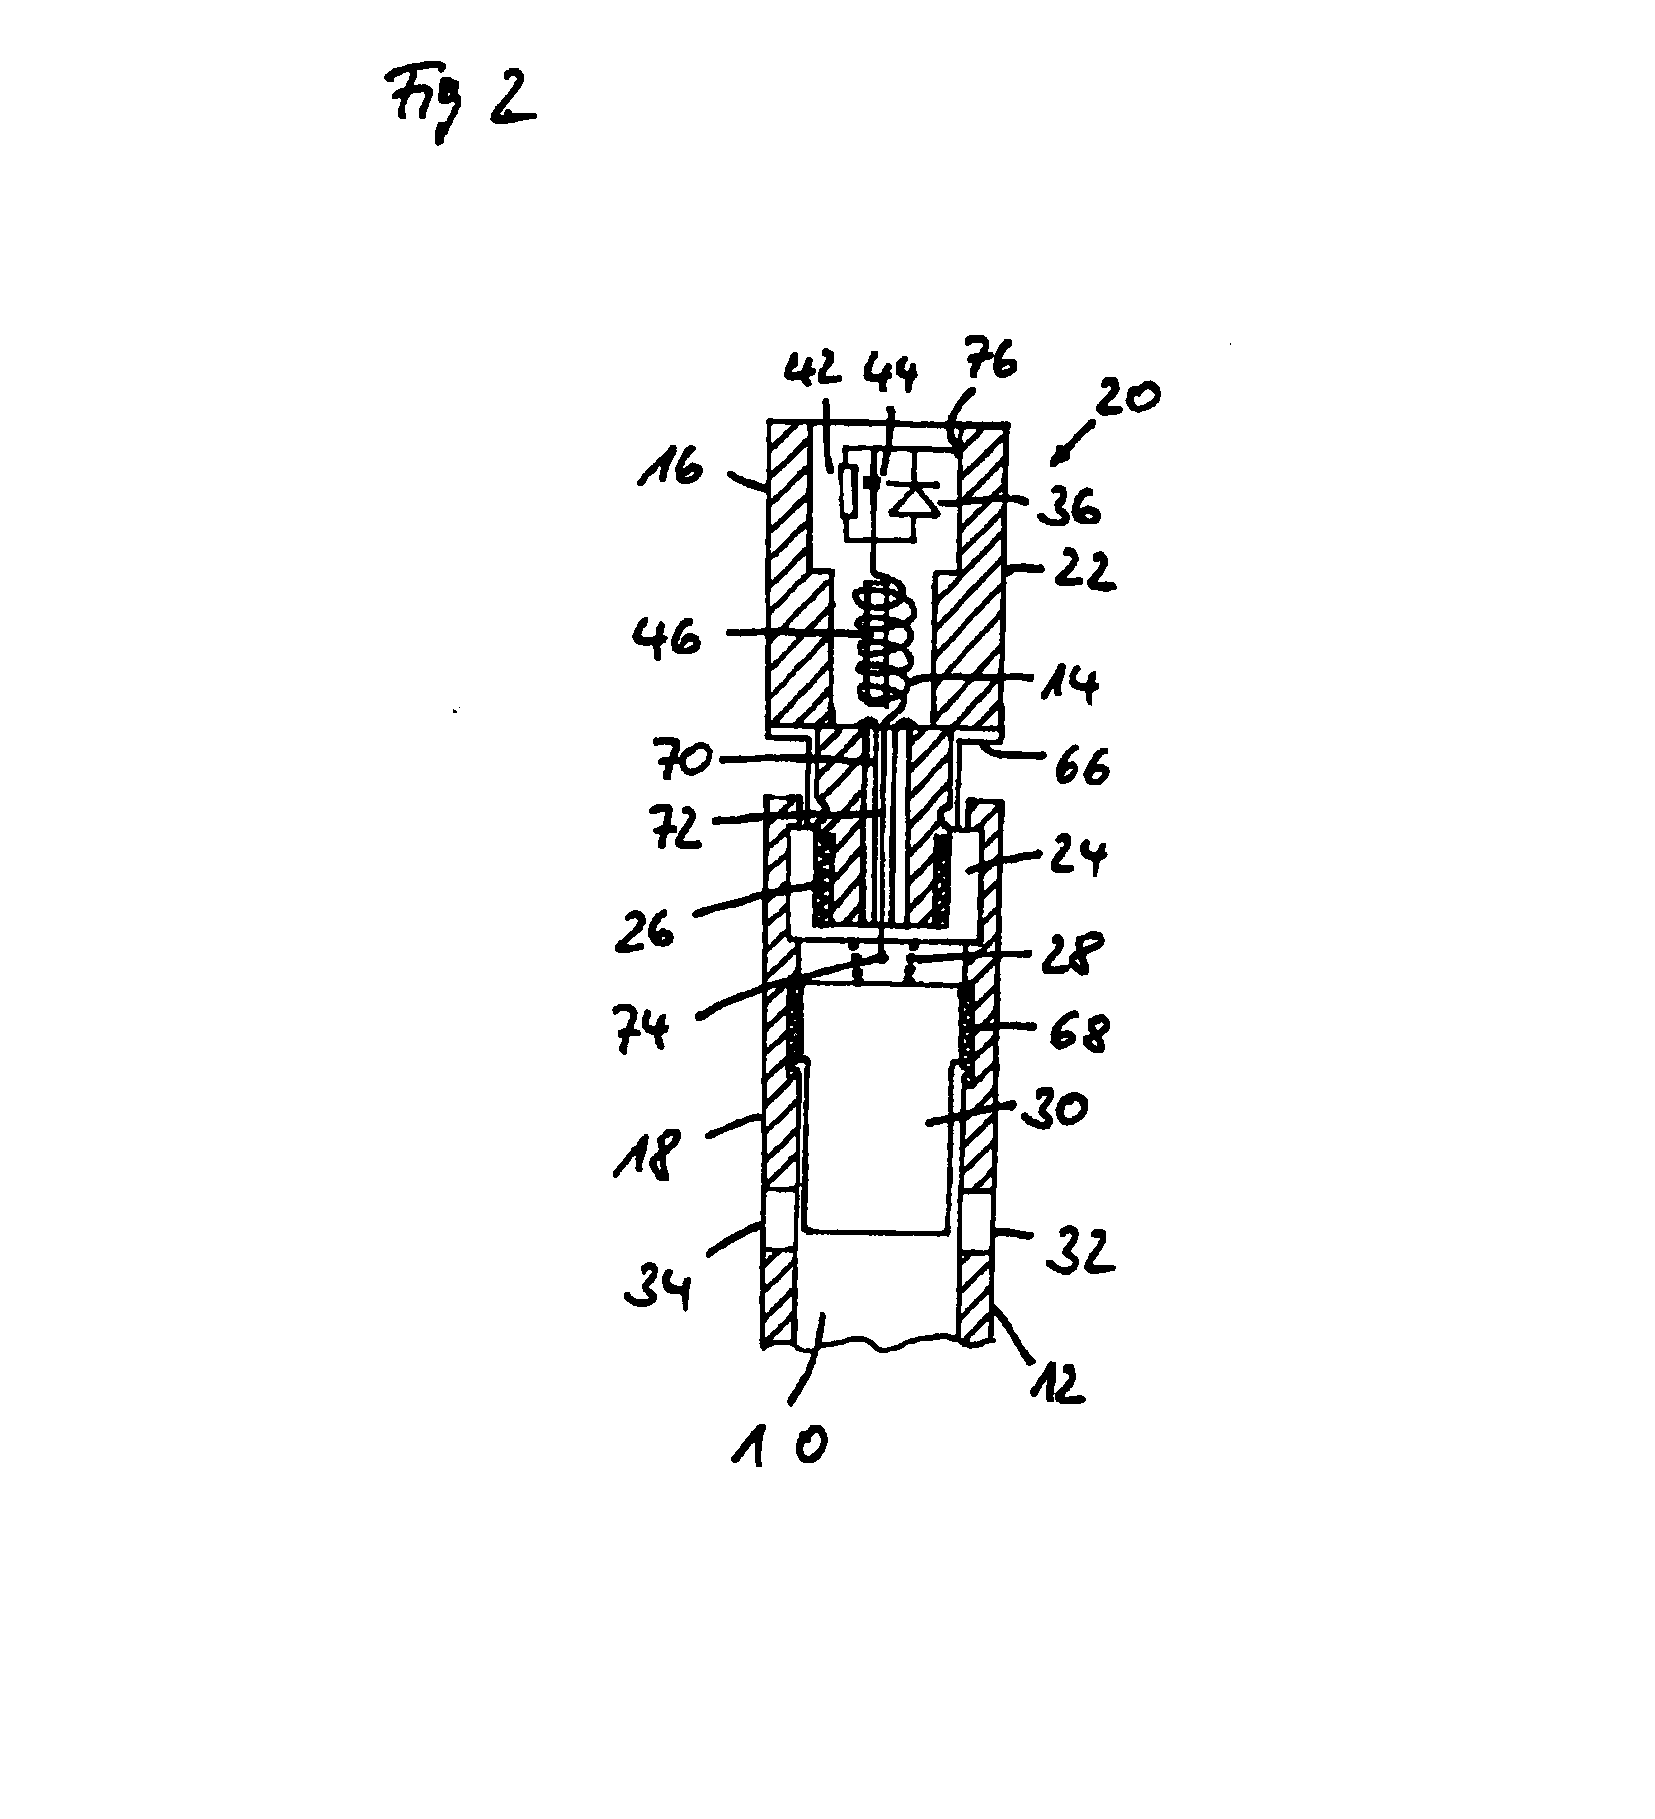 Electrical intramedullary nail system